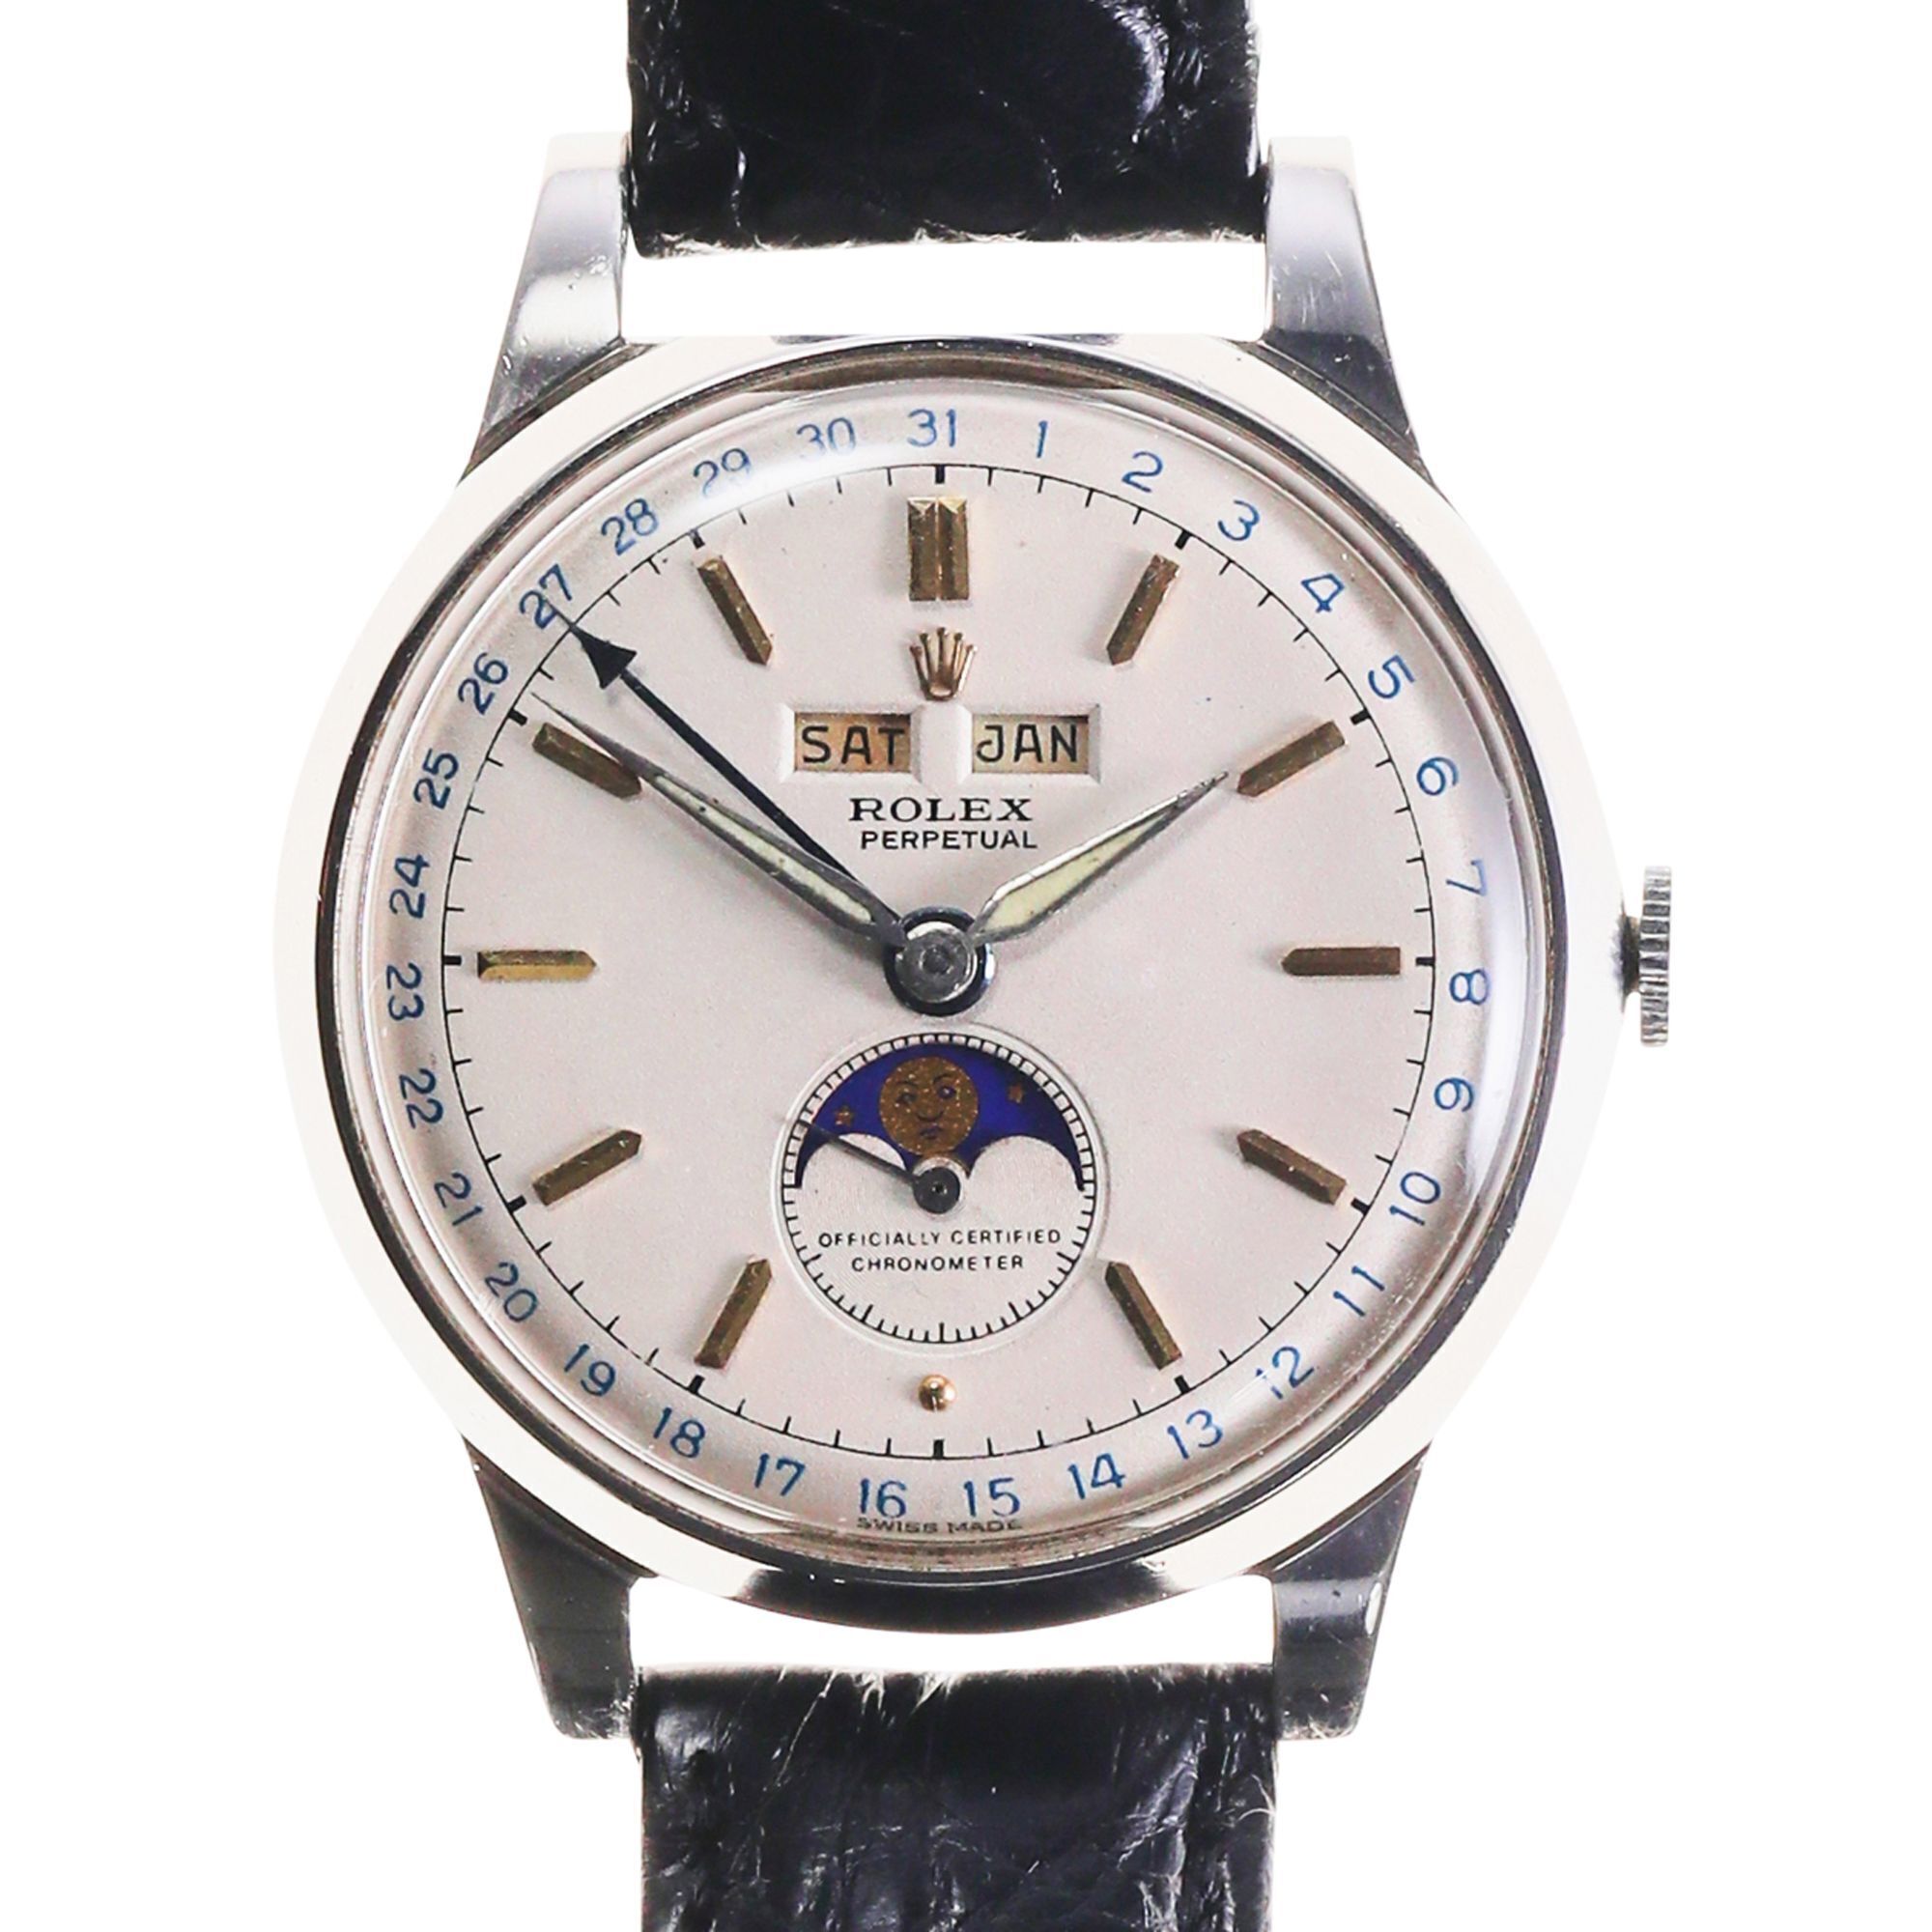 Rolex “Padellone" Ref. 8171 Stainless Steel Triple Calendar Moon Phase Perpetual Wristwatch, Circa 1950